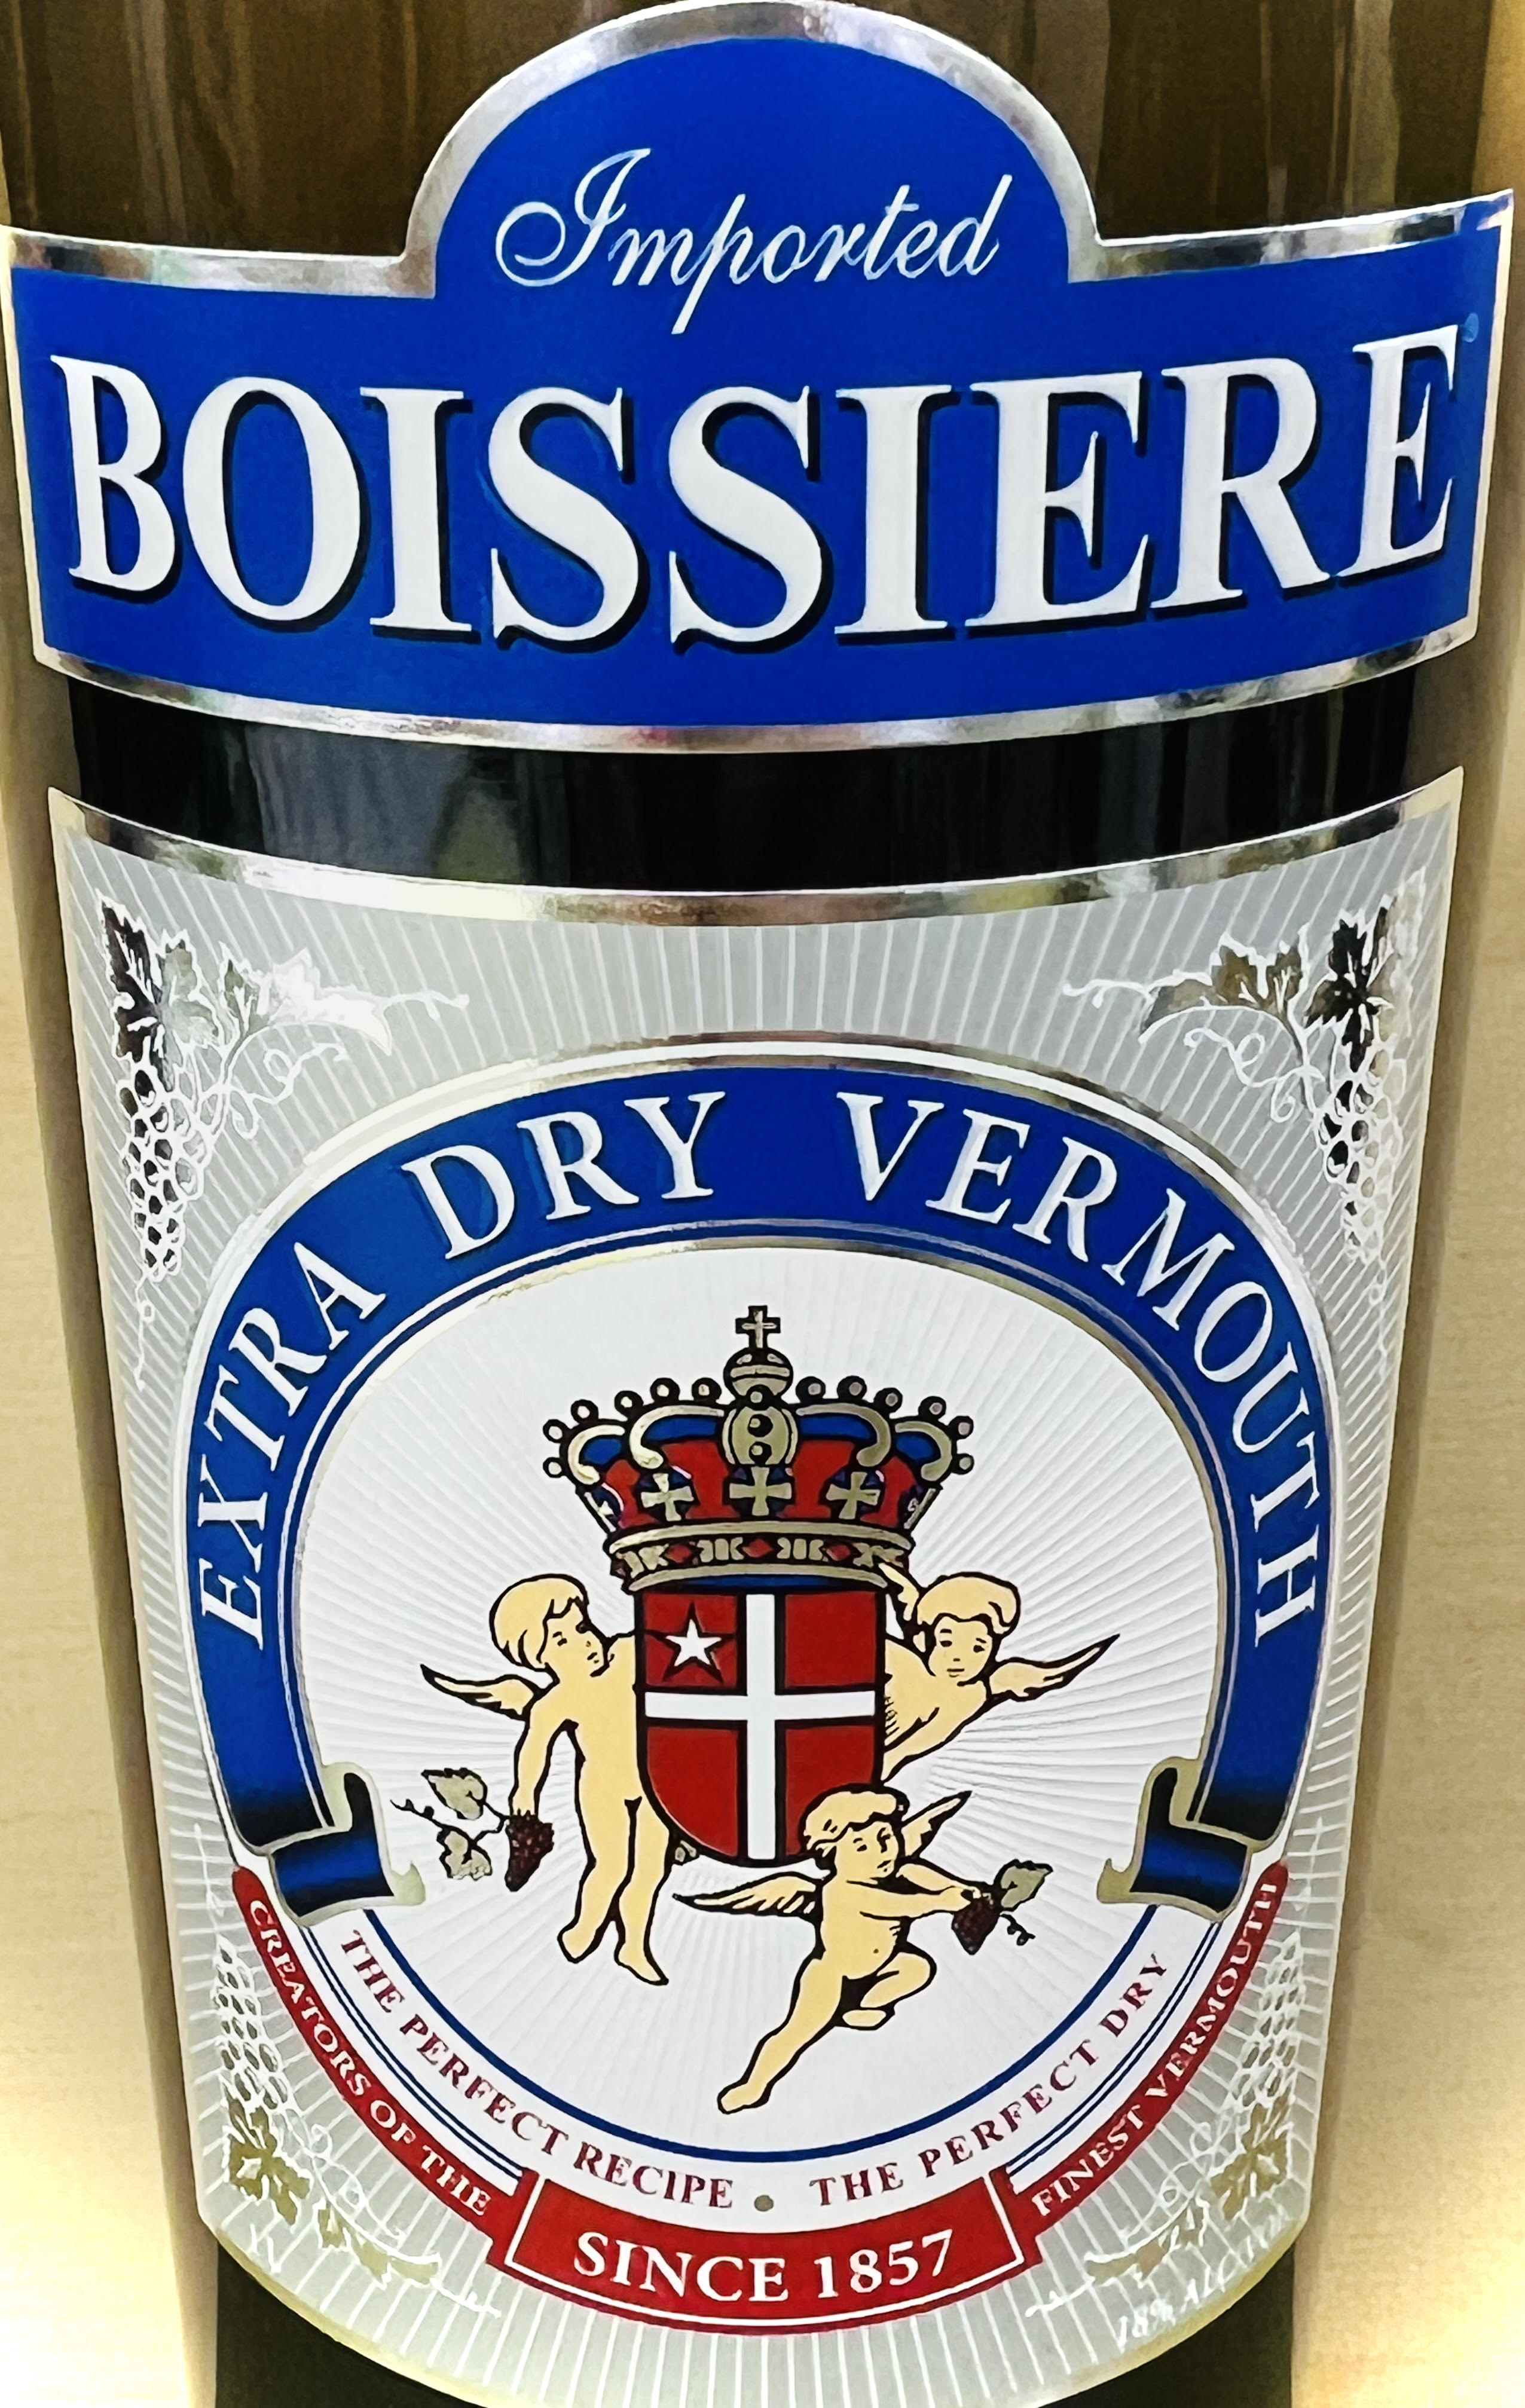 Boissiere Extra Dry Vermouth 1 liter